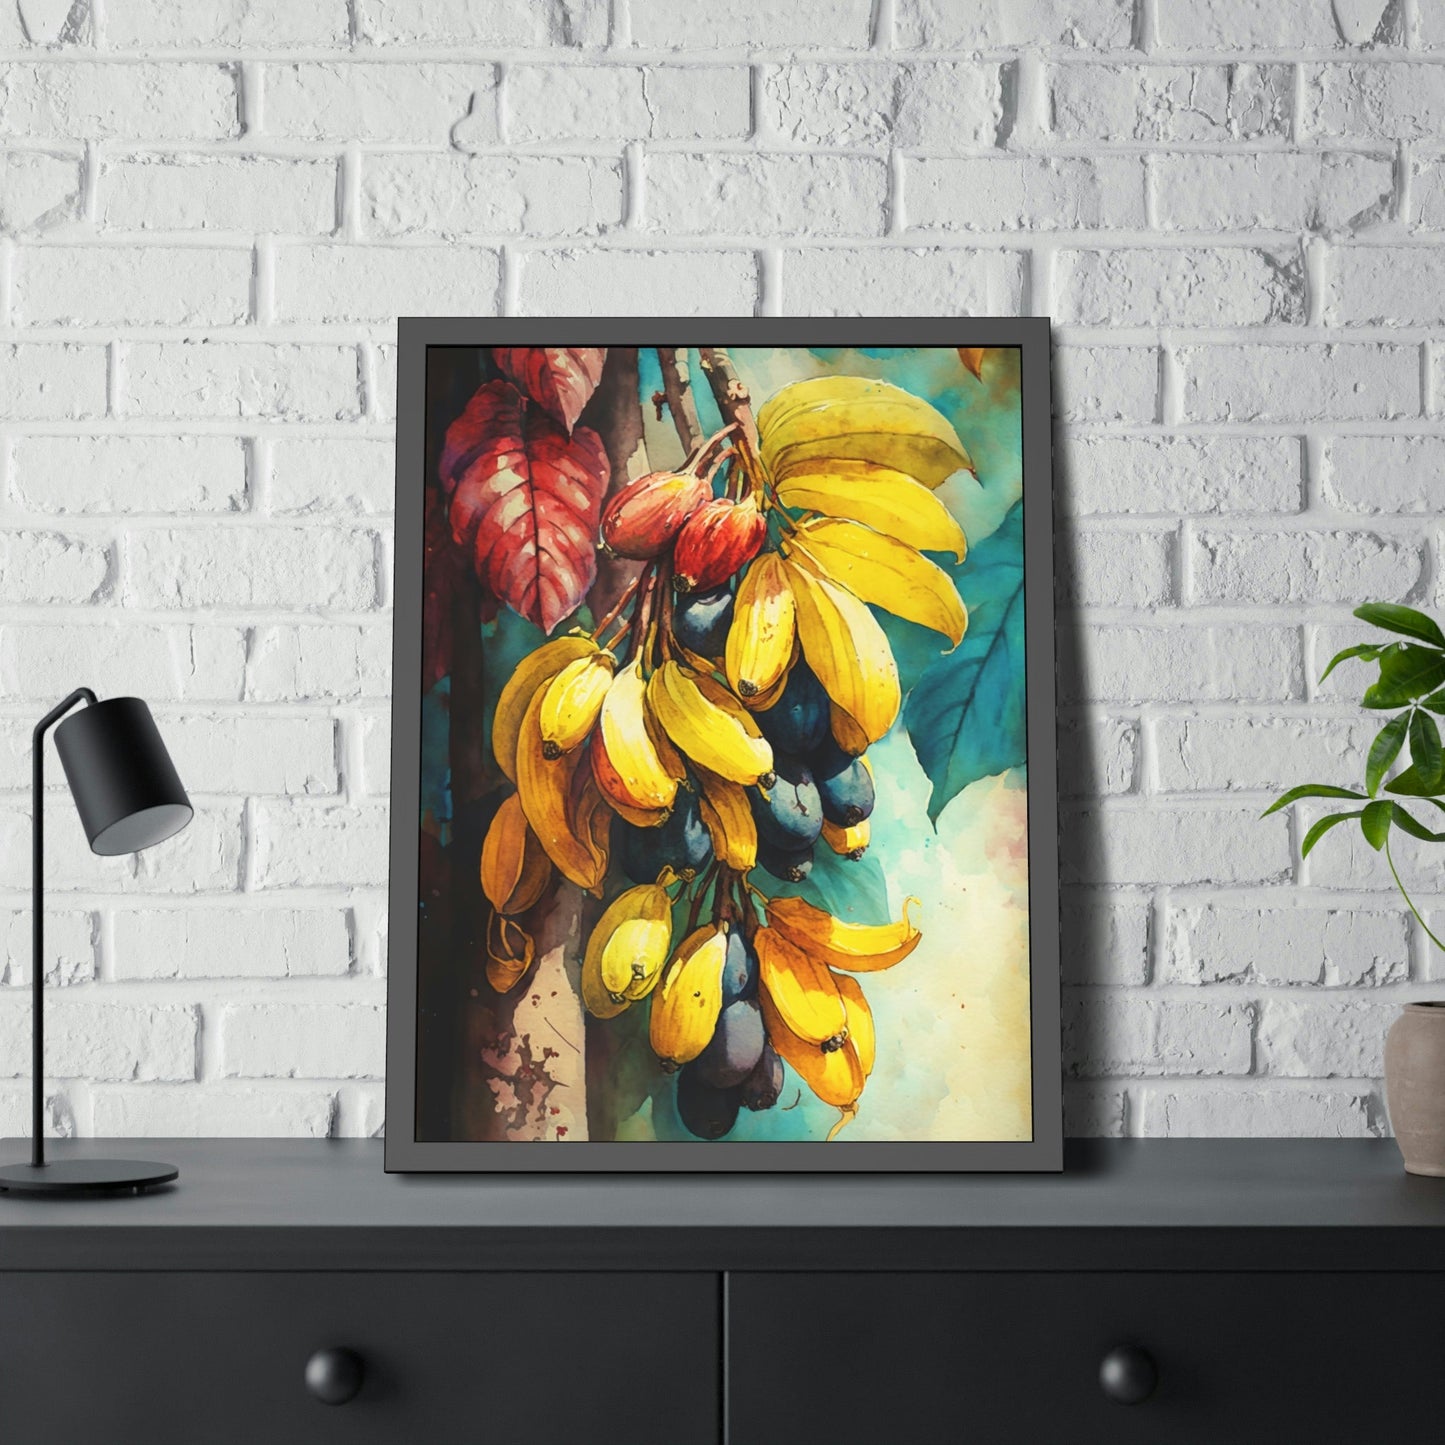 Serenity in Nature: Wall Art of Majestic Banana Trees on Canvas & Posters